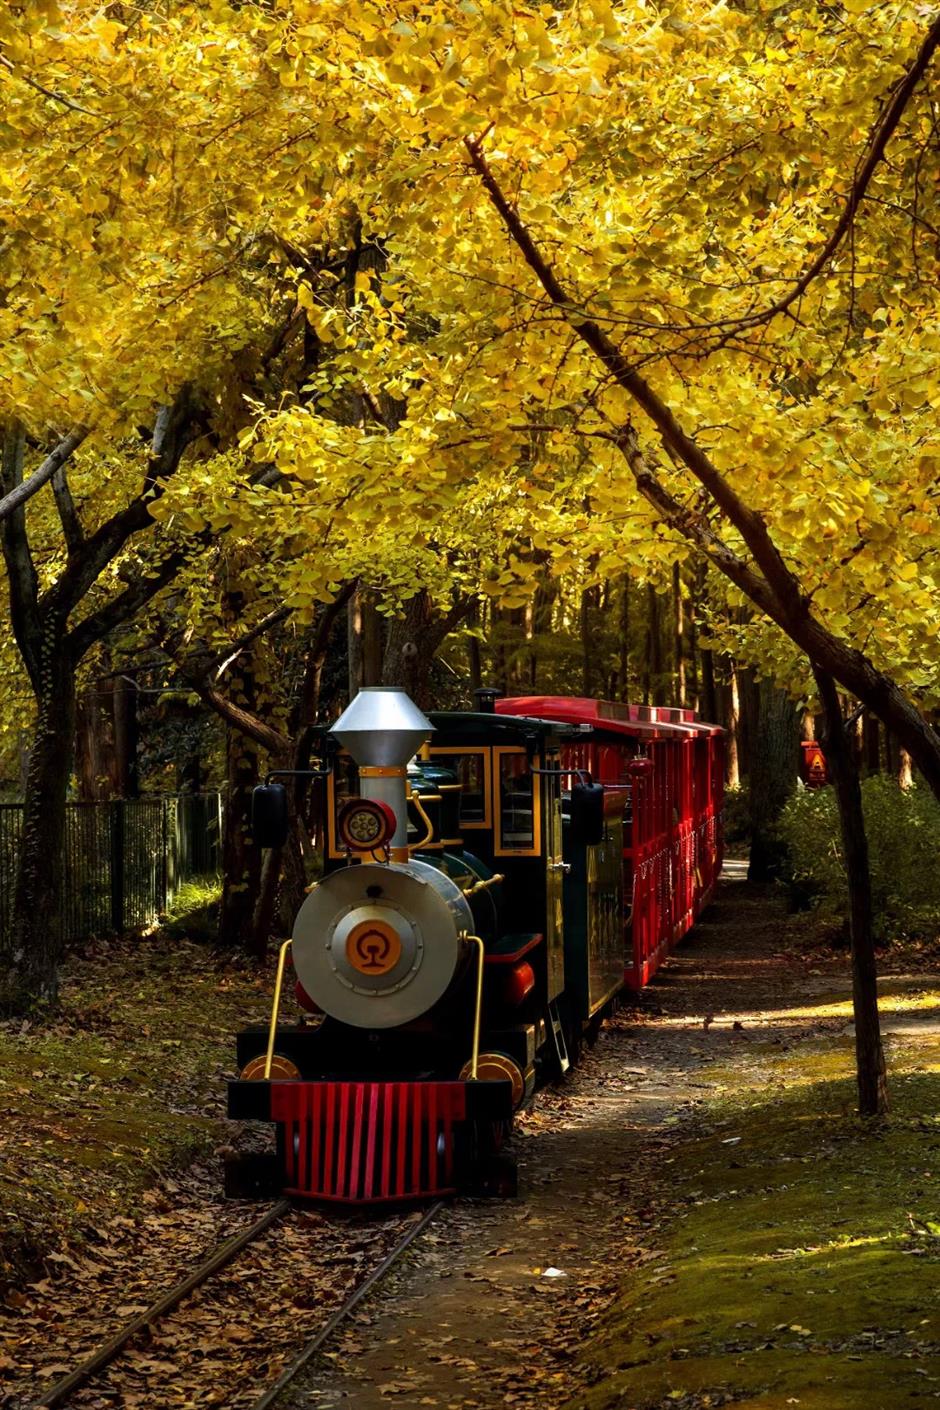 'ParkWalk': a guide to the city's colorful autumnal foliage